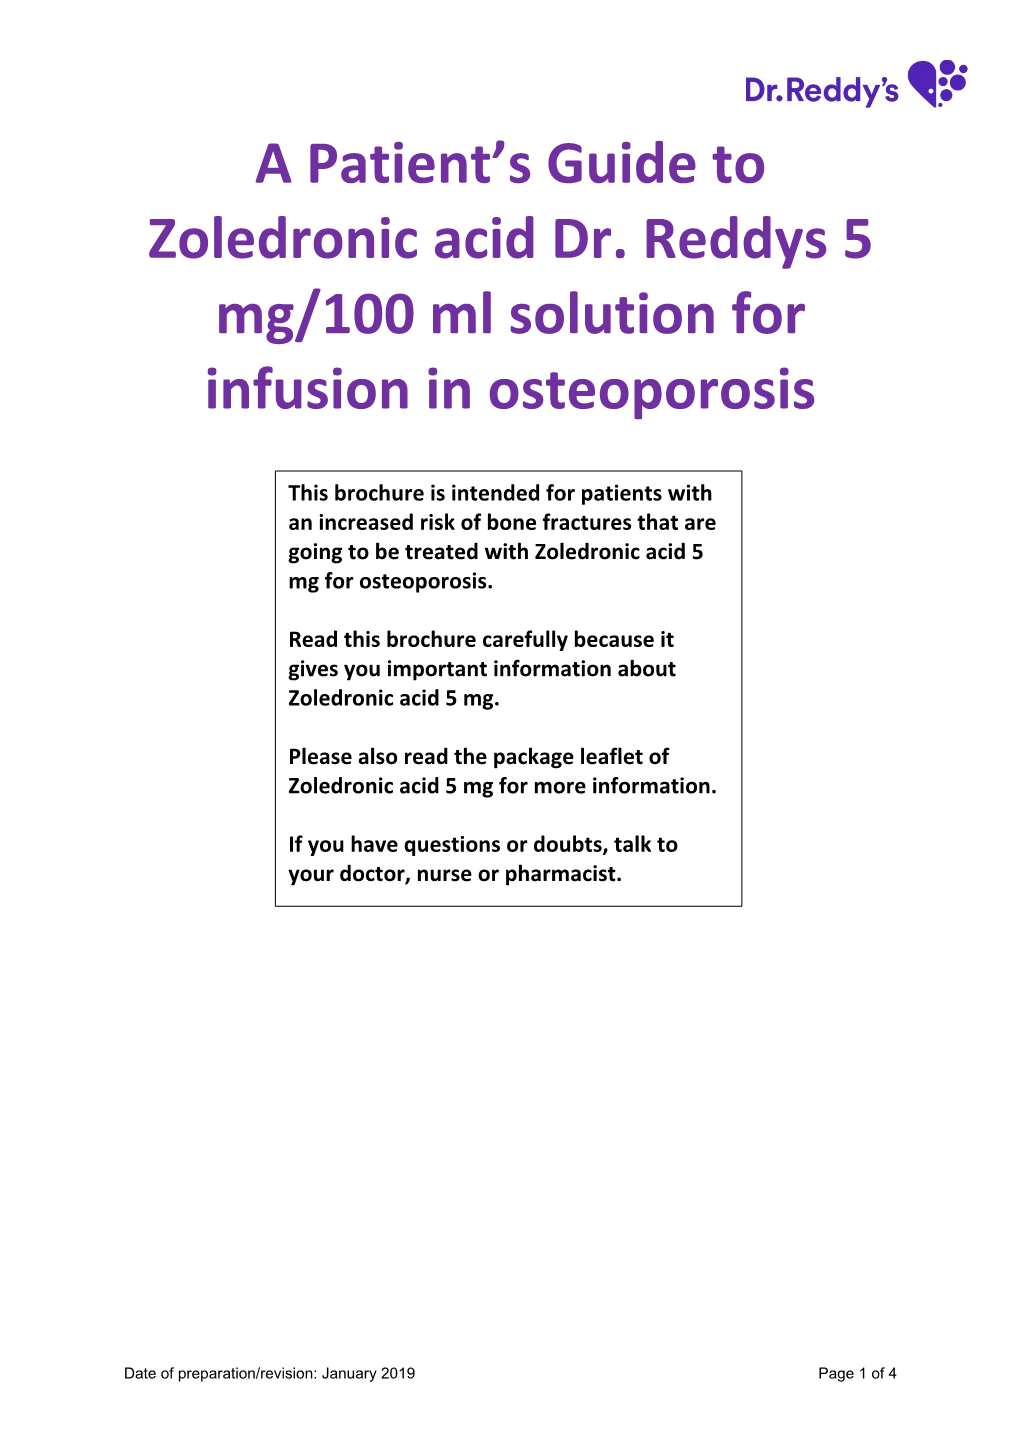 A Patient's Guide to Zoledronic Acid Dr. Reddy's 5Mg/100Ml Solution For